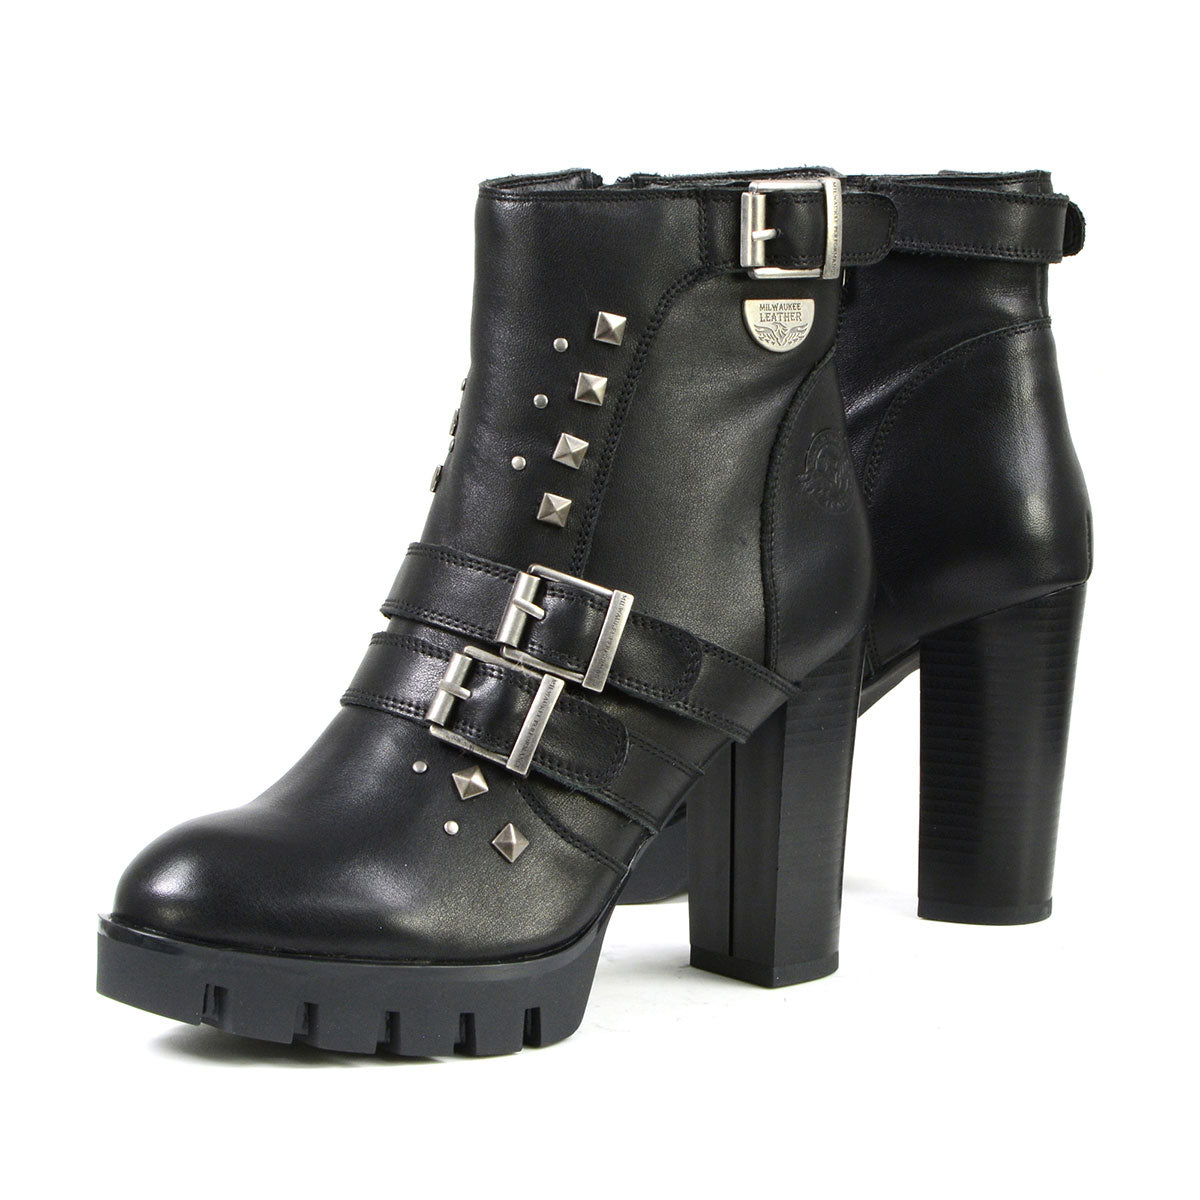 Milwaukee Leather MBL9456 Women's Black Leather Platform Boots with Straps